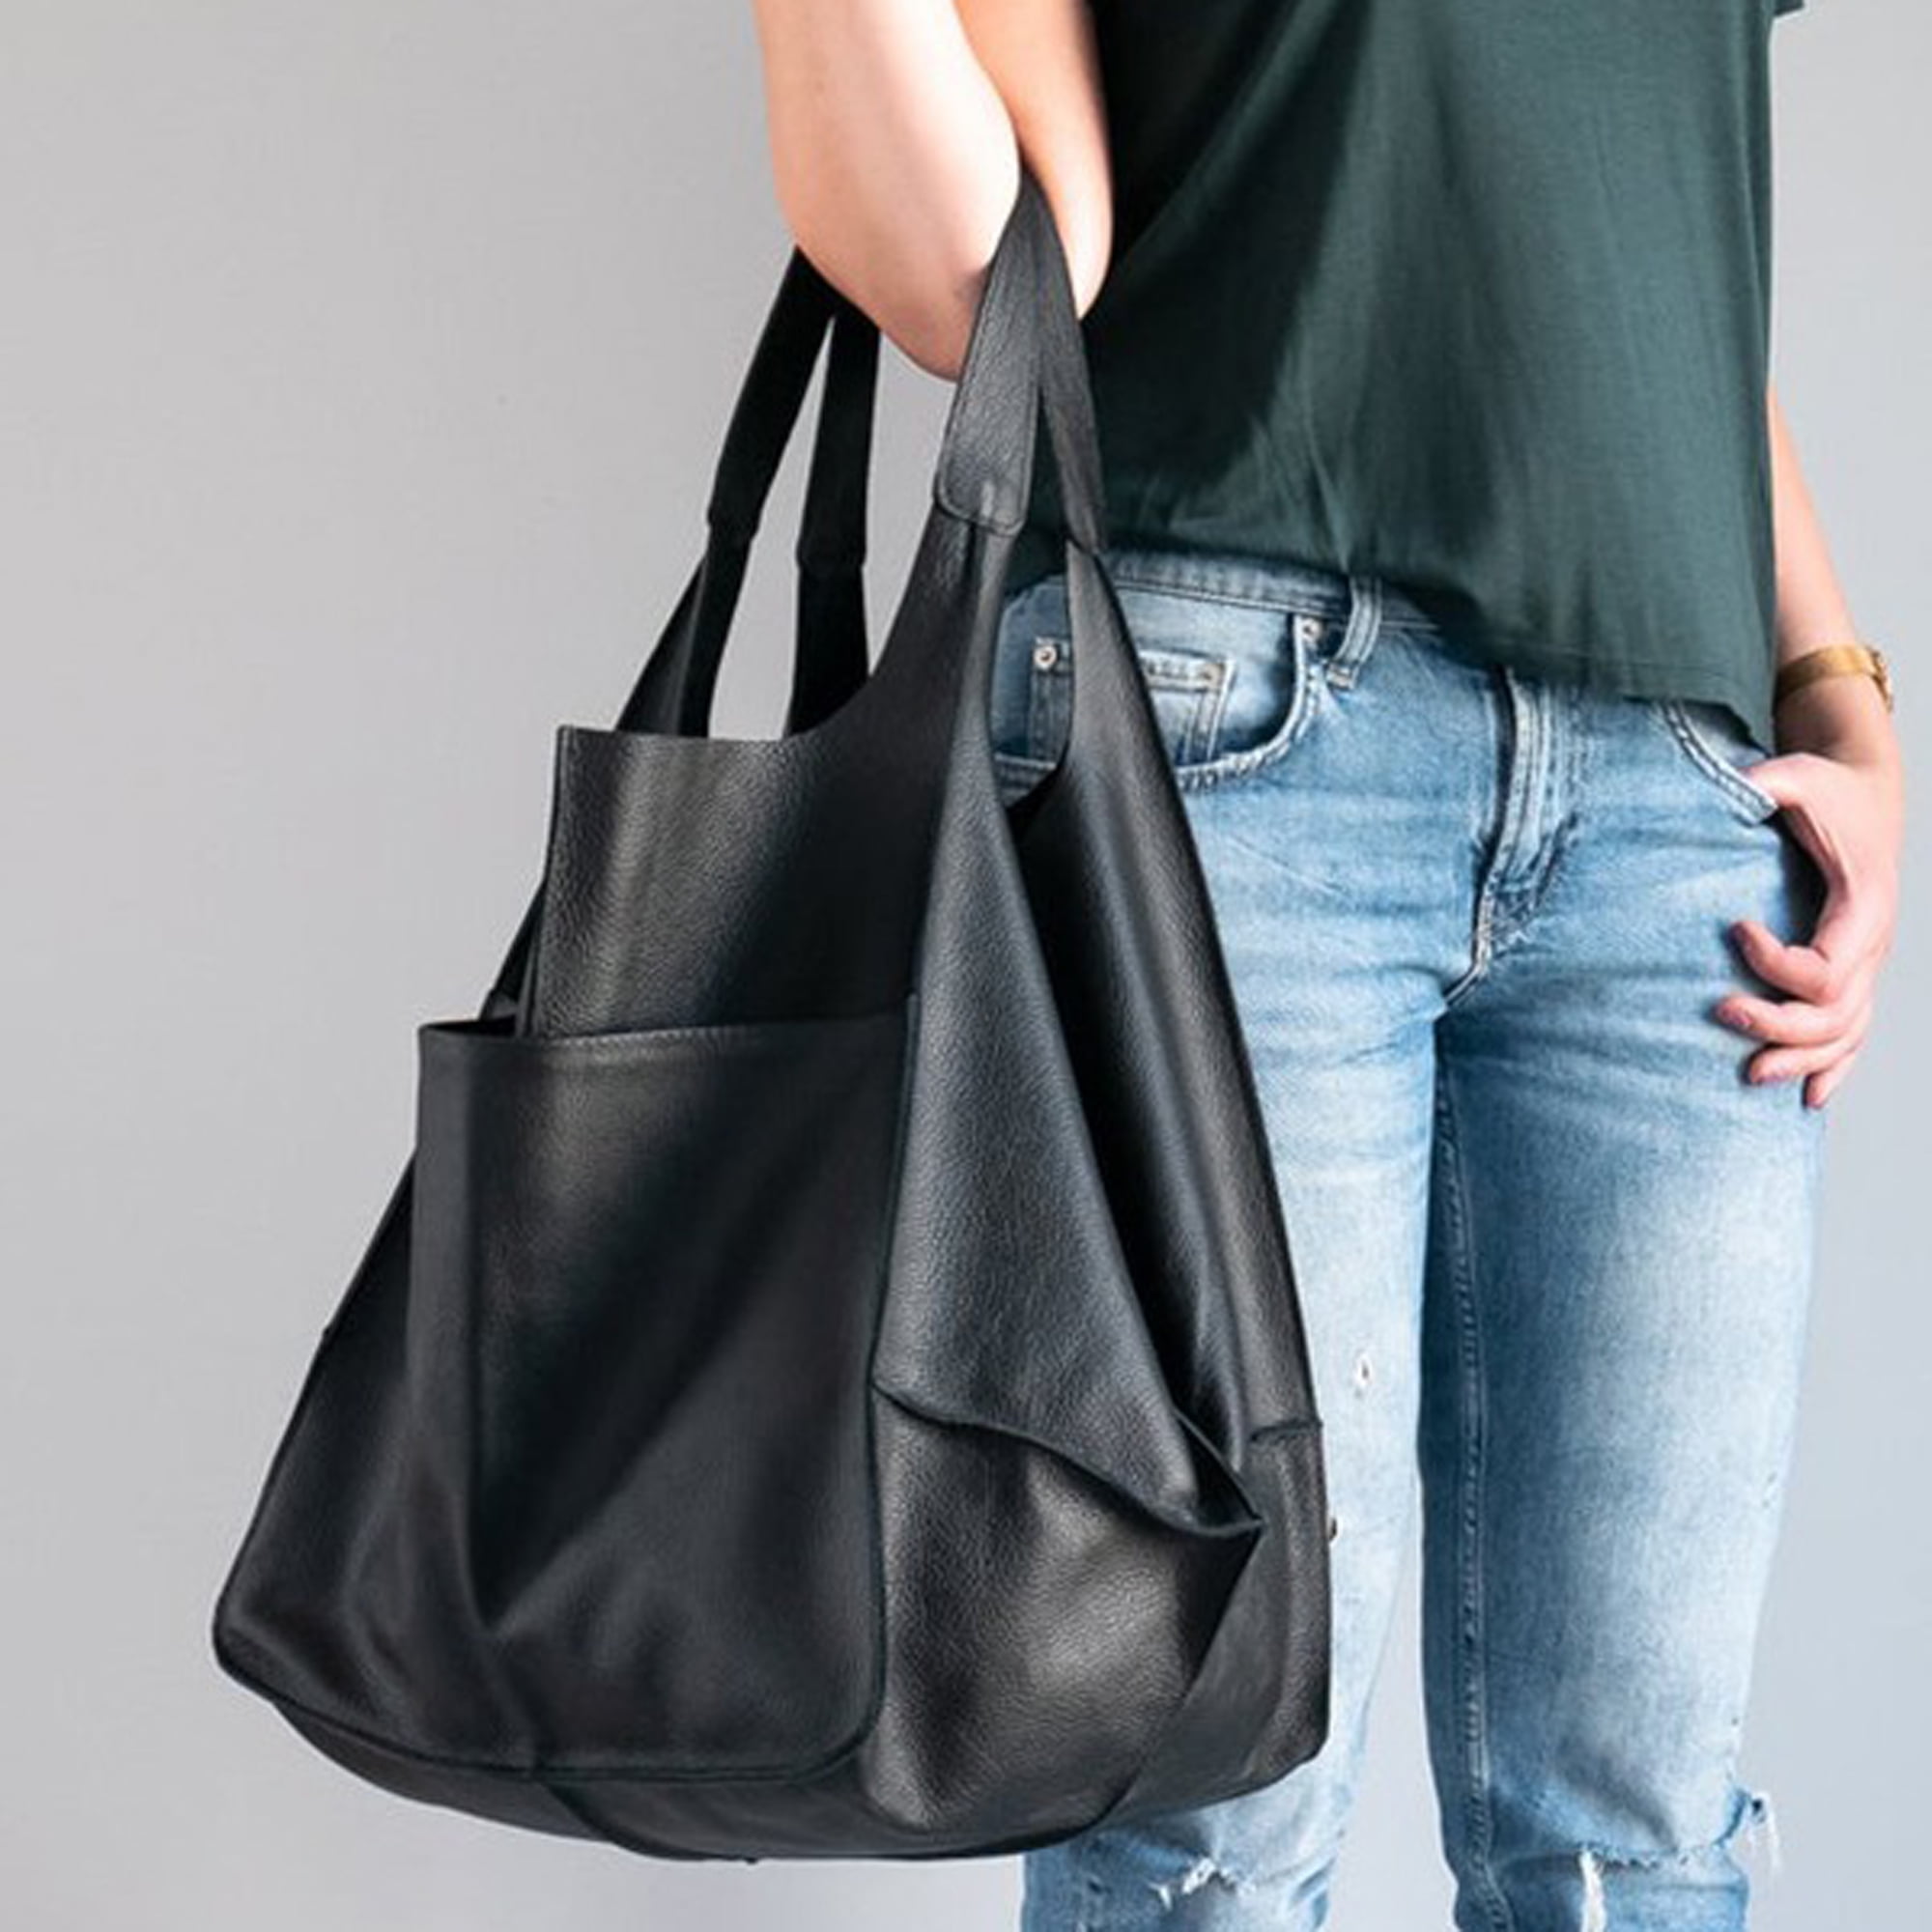 Icy Leather Quilted Oversized Shoulder Bag For Women Extra Large Shopping  Tote With Luxury Appeal And Designer Wallet From Bags308, $33.79 |  DHgate.Com